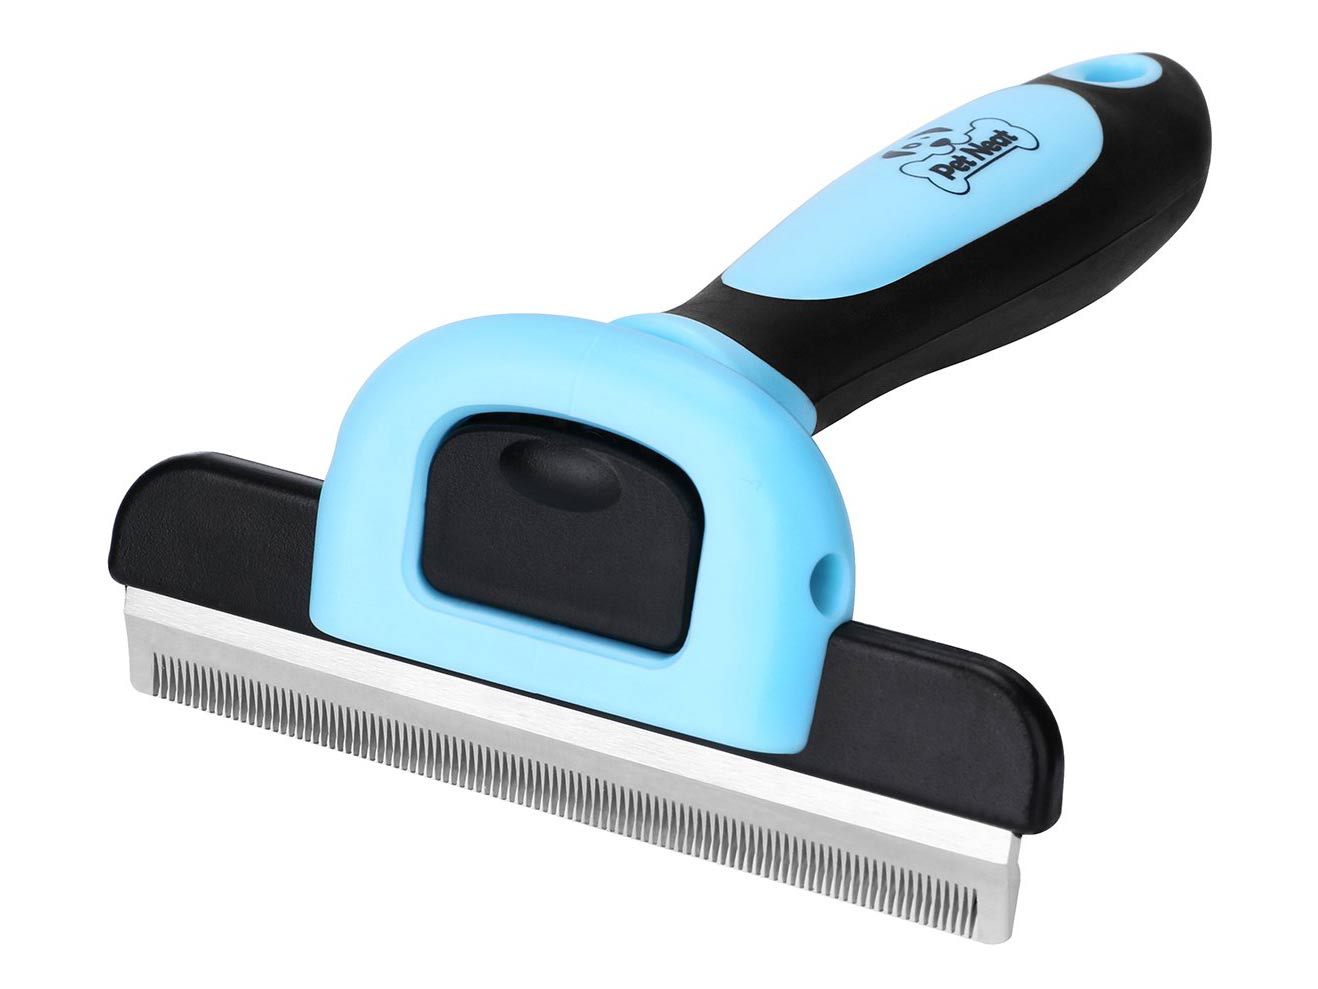 A blue pet-grooming fine-toothed brush.